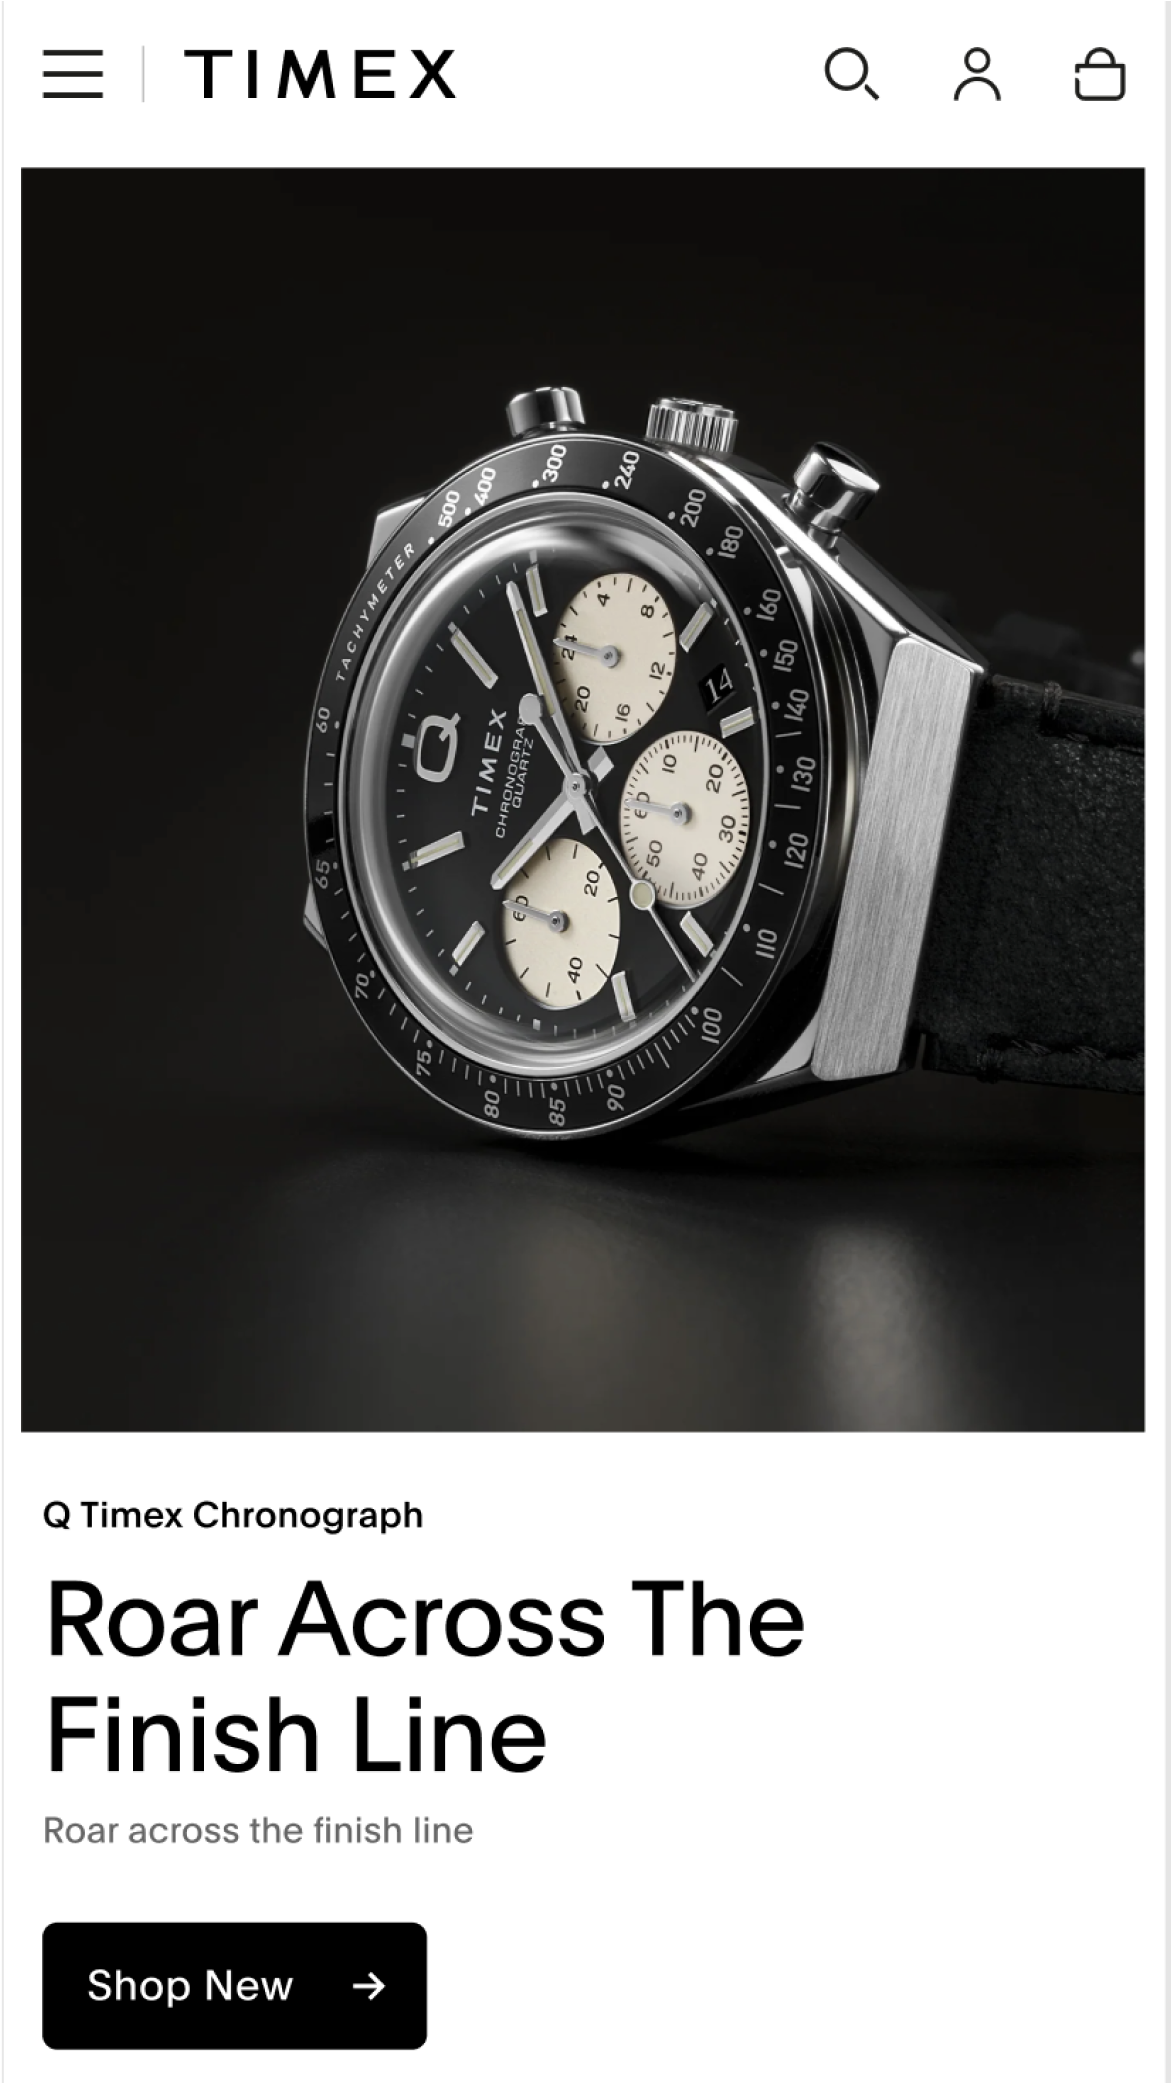 Mobile screenshot of a collection feature for the Q Timex Chronograph